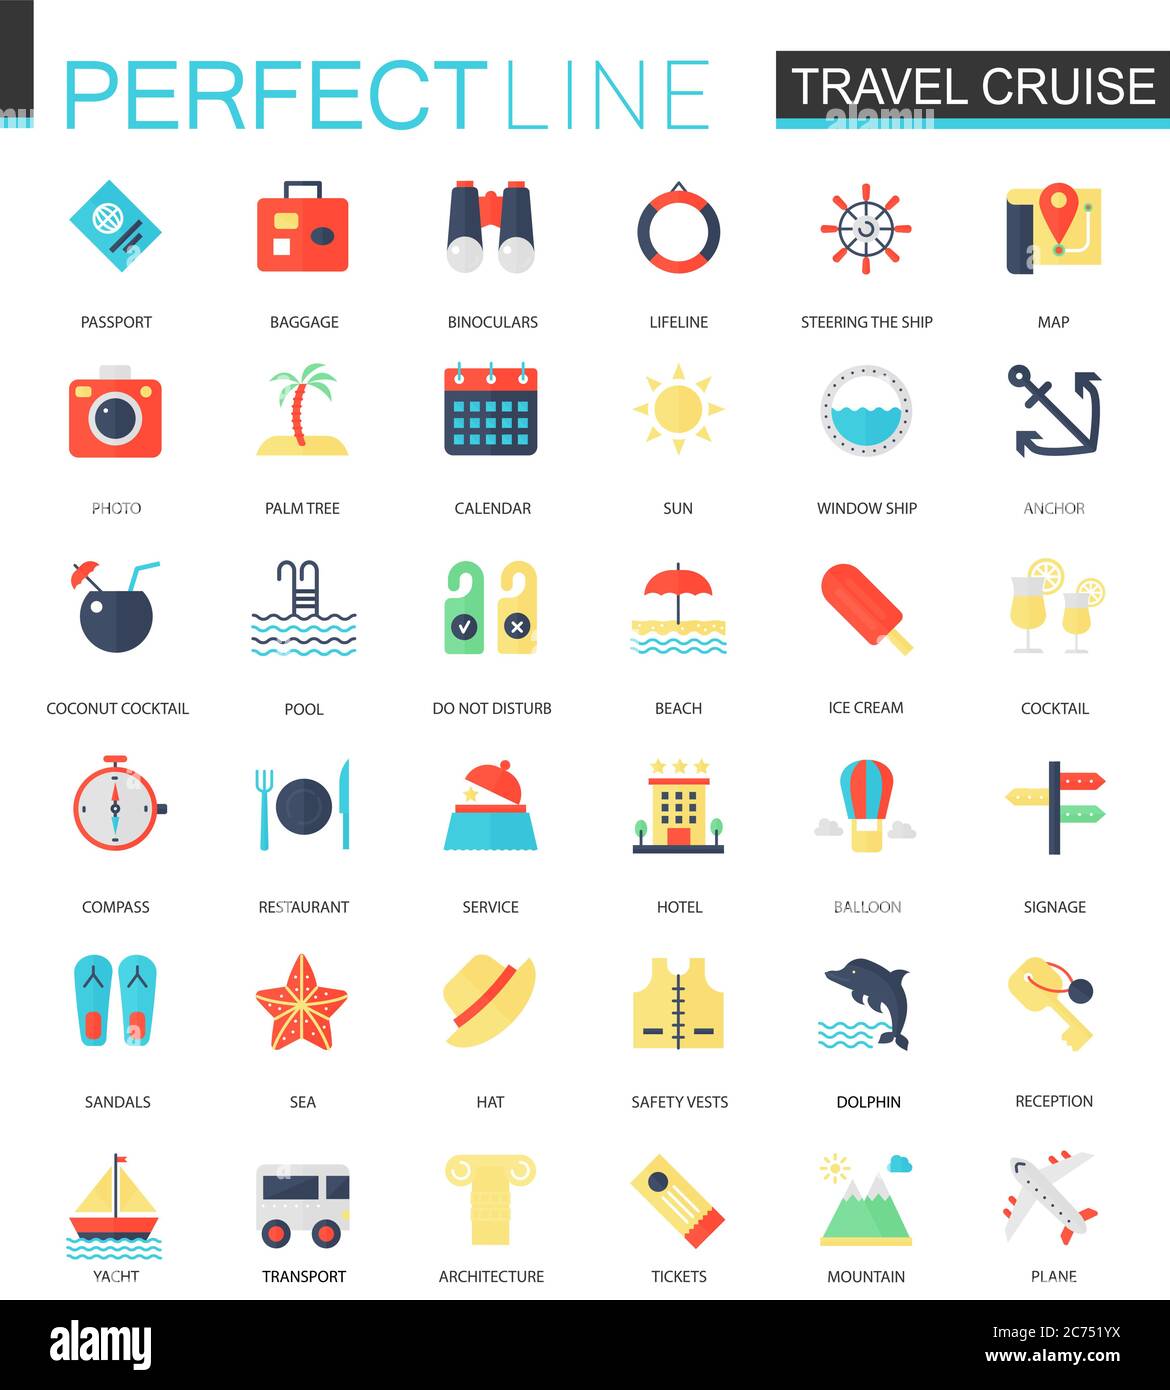 Vector set of flat Travel cruise icons isolated. Stock Vector